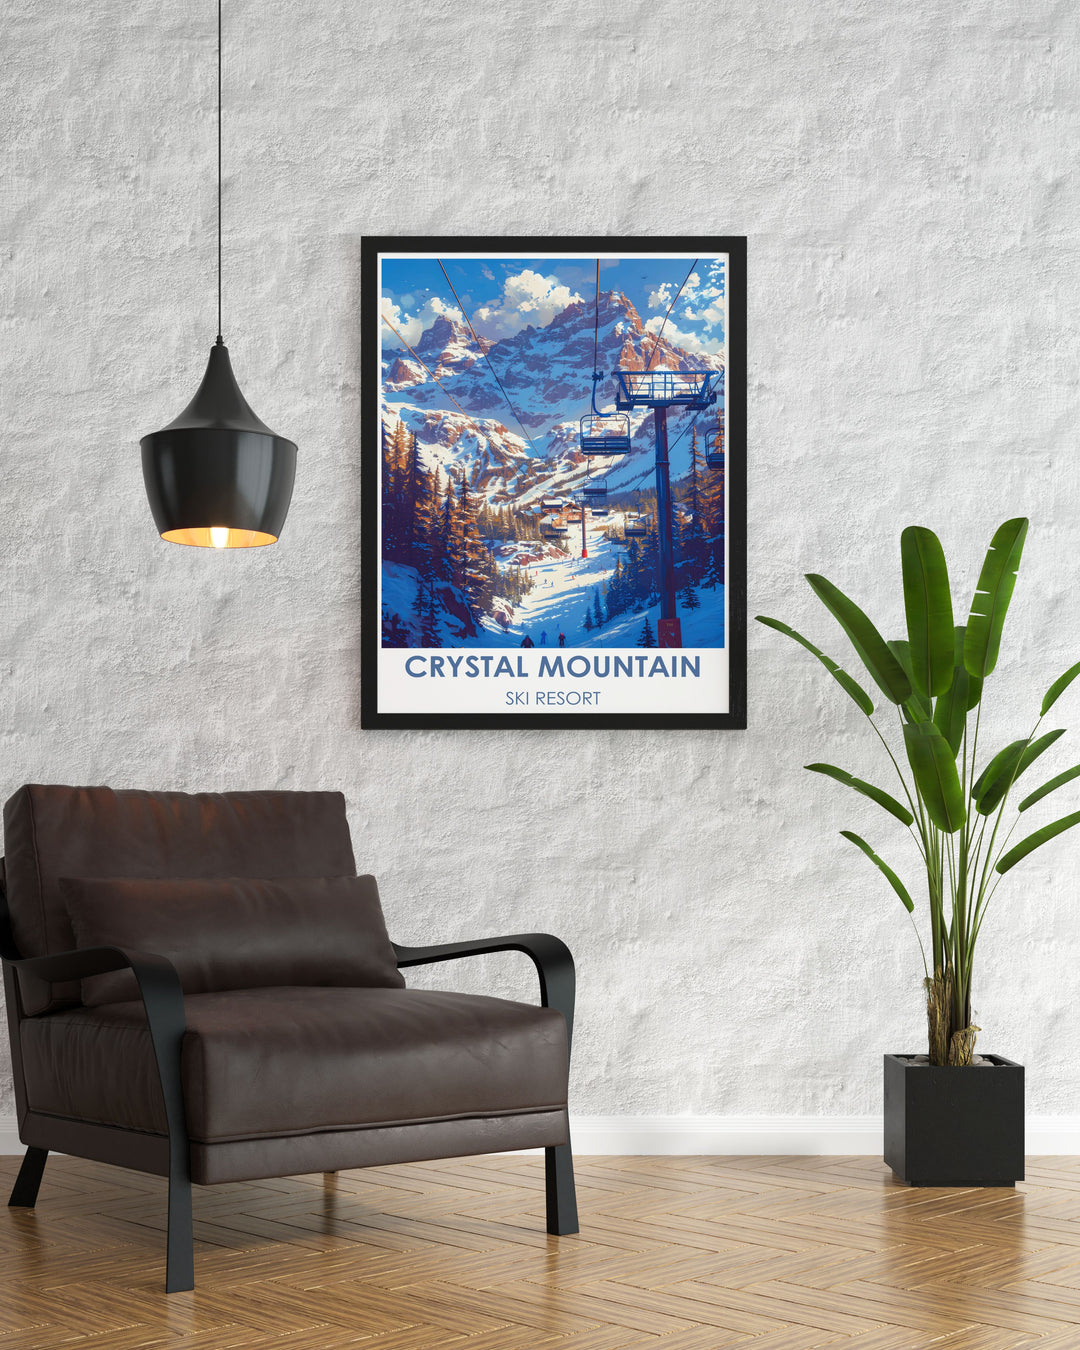 Framed art illustrating the excitement of Crystal Mountains ski slopes and the picturesque surroundings of the Cascade Range, a perfect gift for adventure lovers.